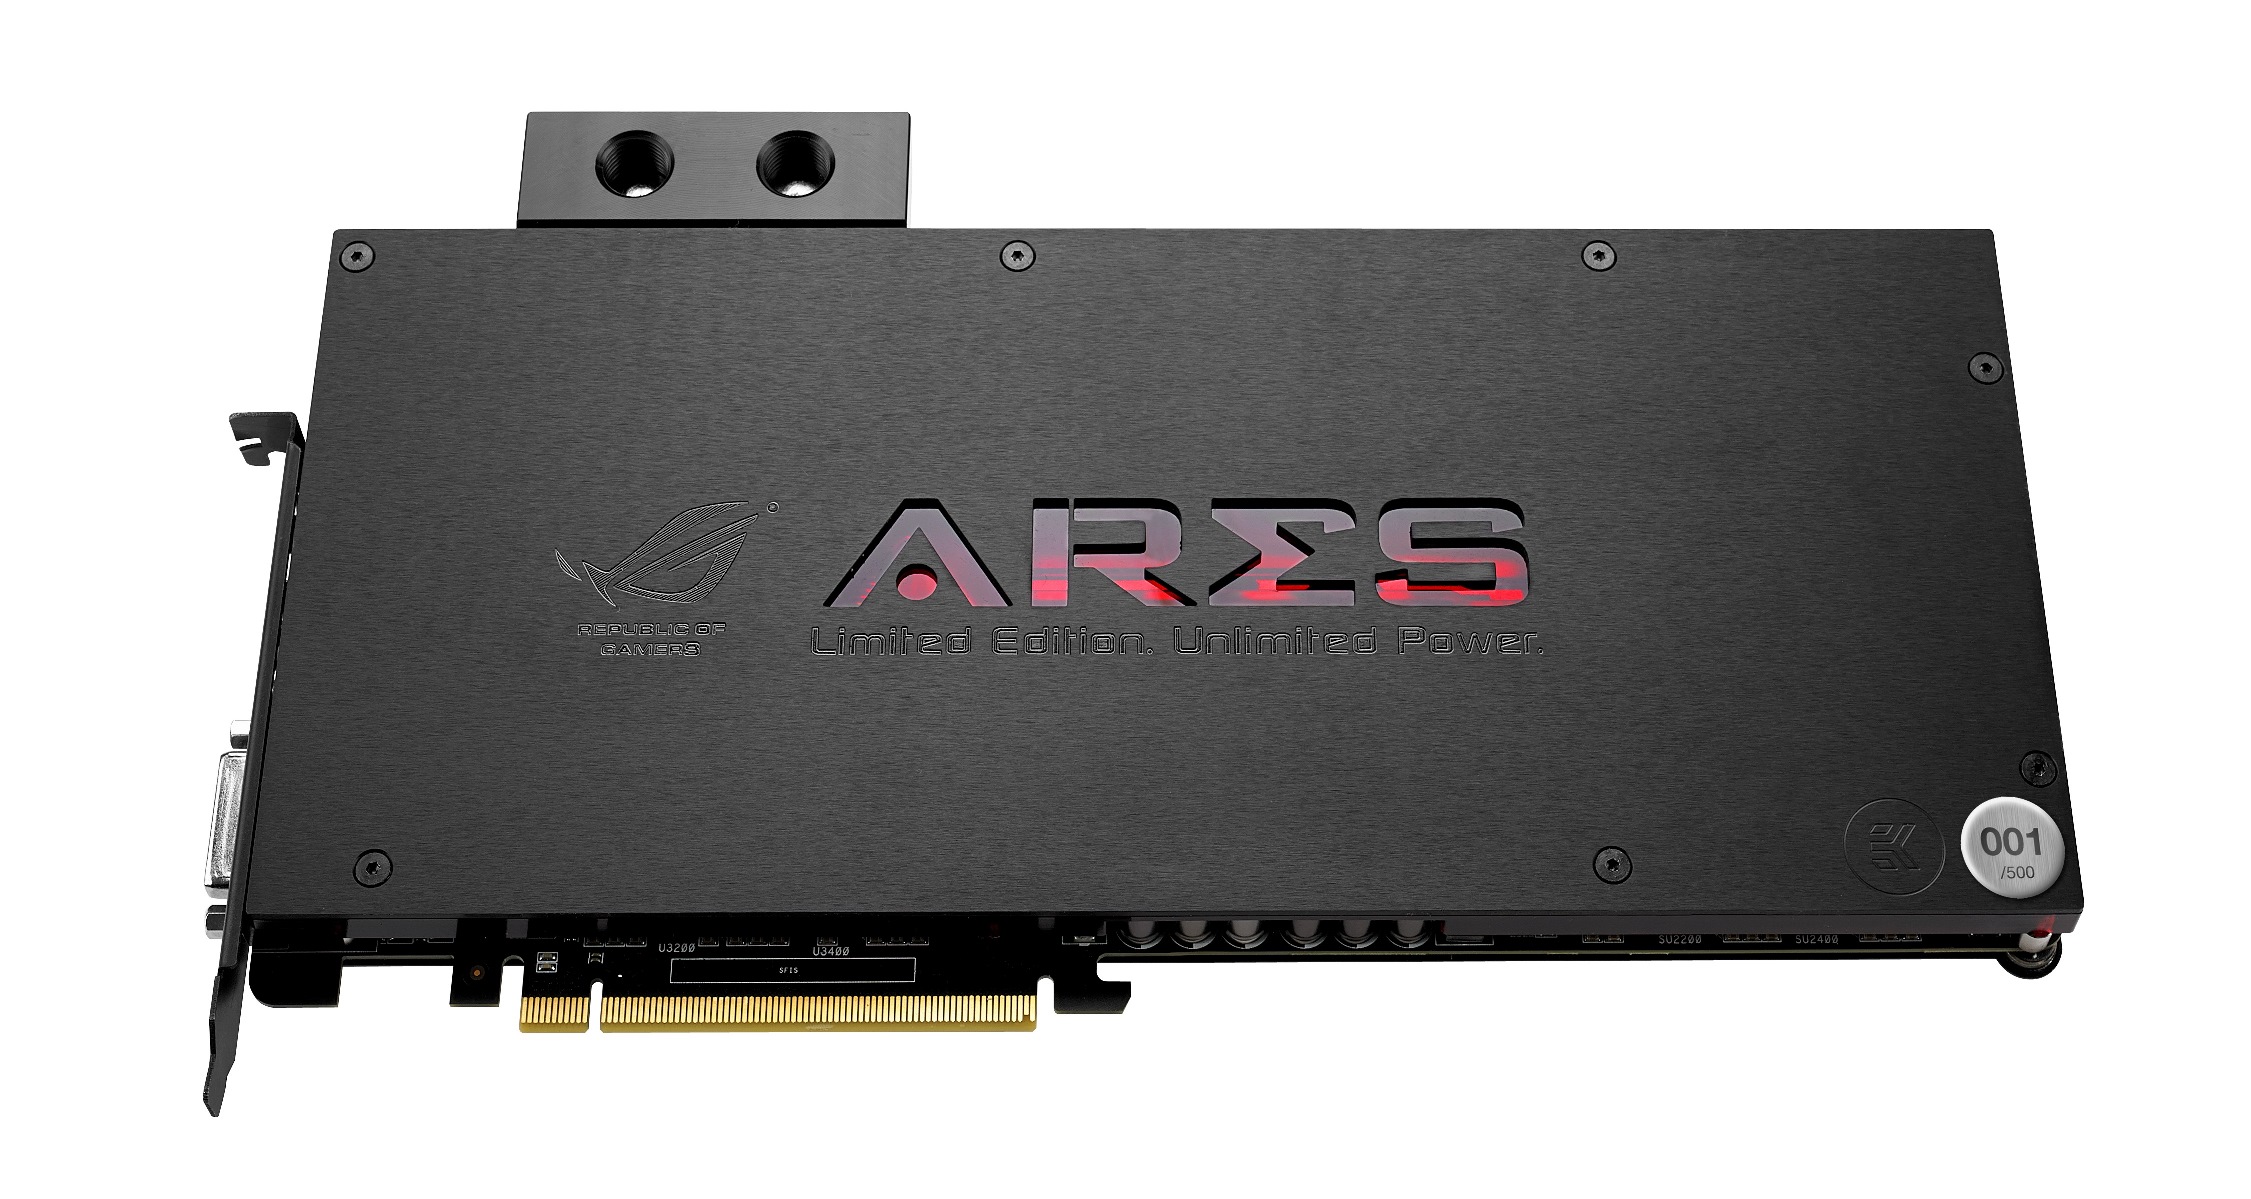 ASUS ROG Ares III 01